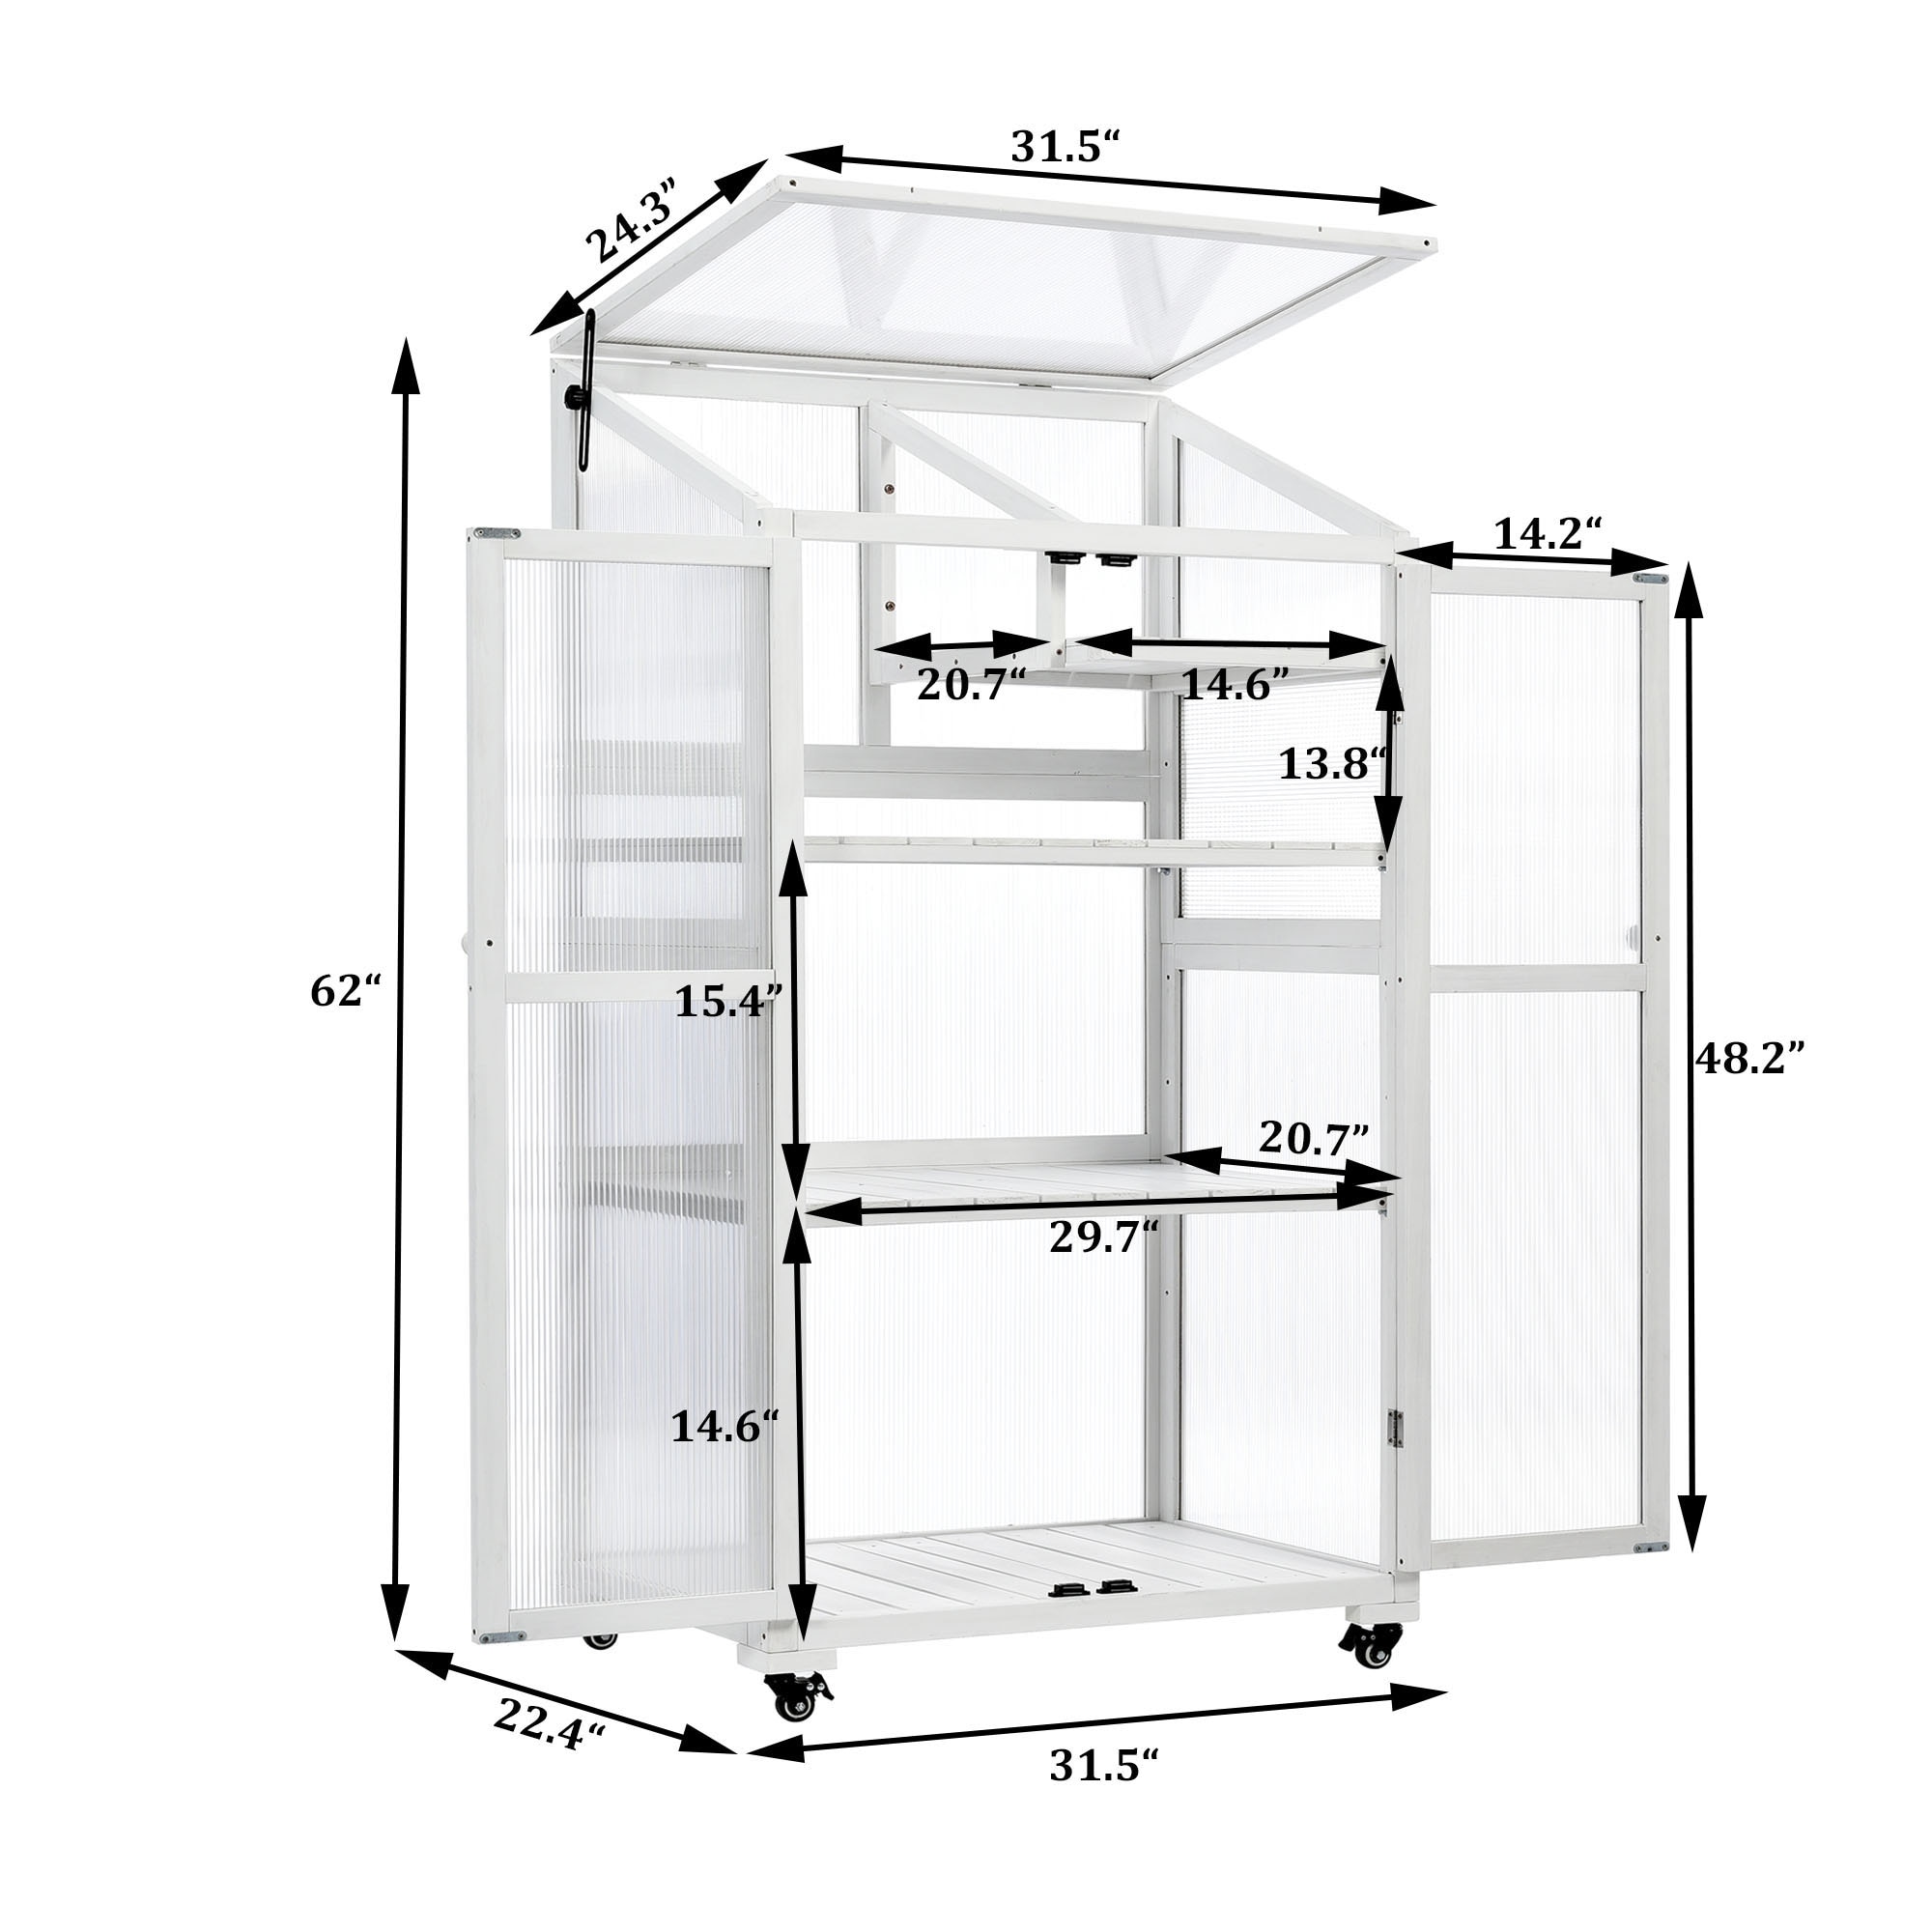 Clihome Mini Greenhouse Cold Frame 2.7-ft L x 1.87-ft W x 5.17-ft H ...